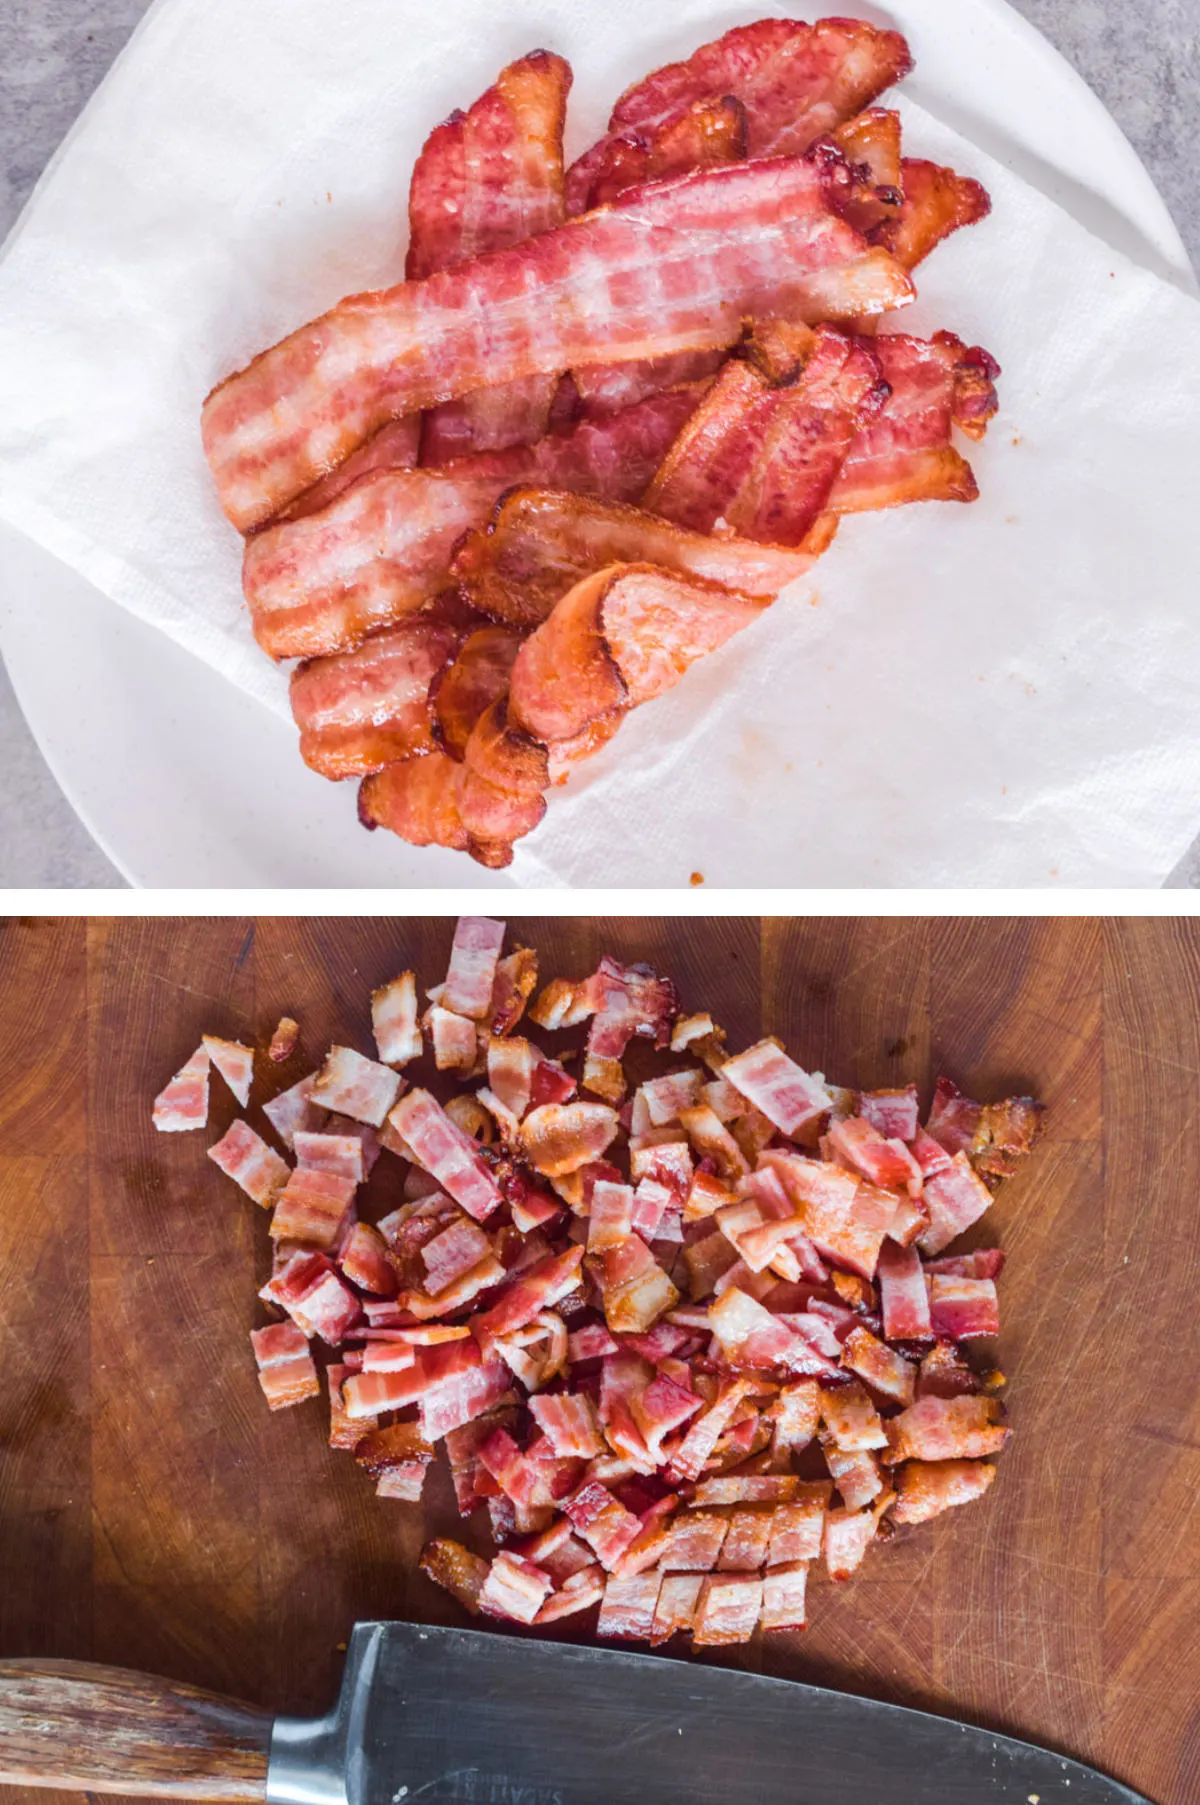 Two overhead images in one: 1. Cooked bacon on paper towel. 2. Chopped bacon on cutting board with chef knife. 